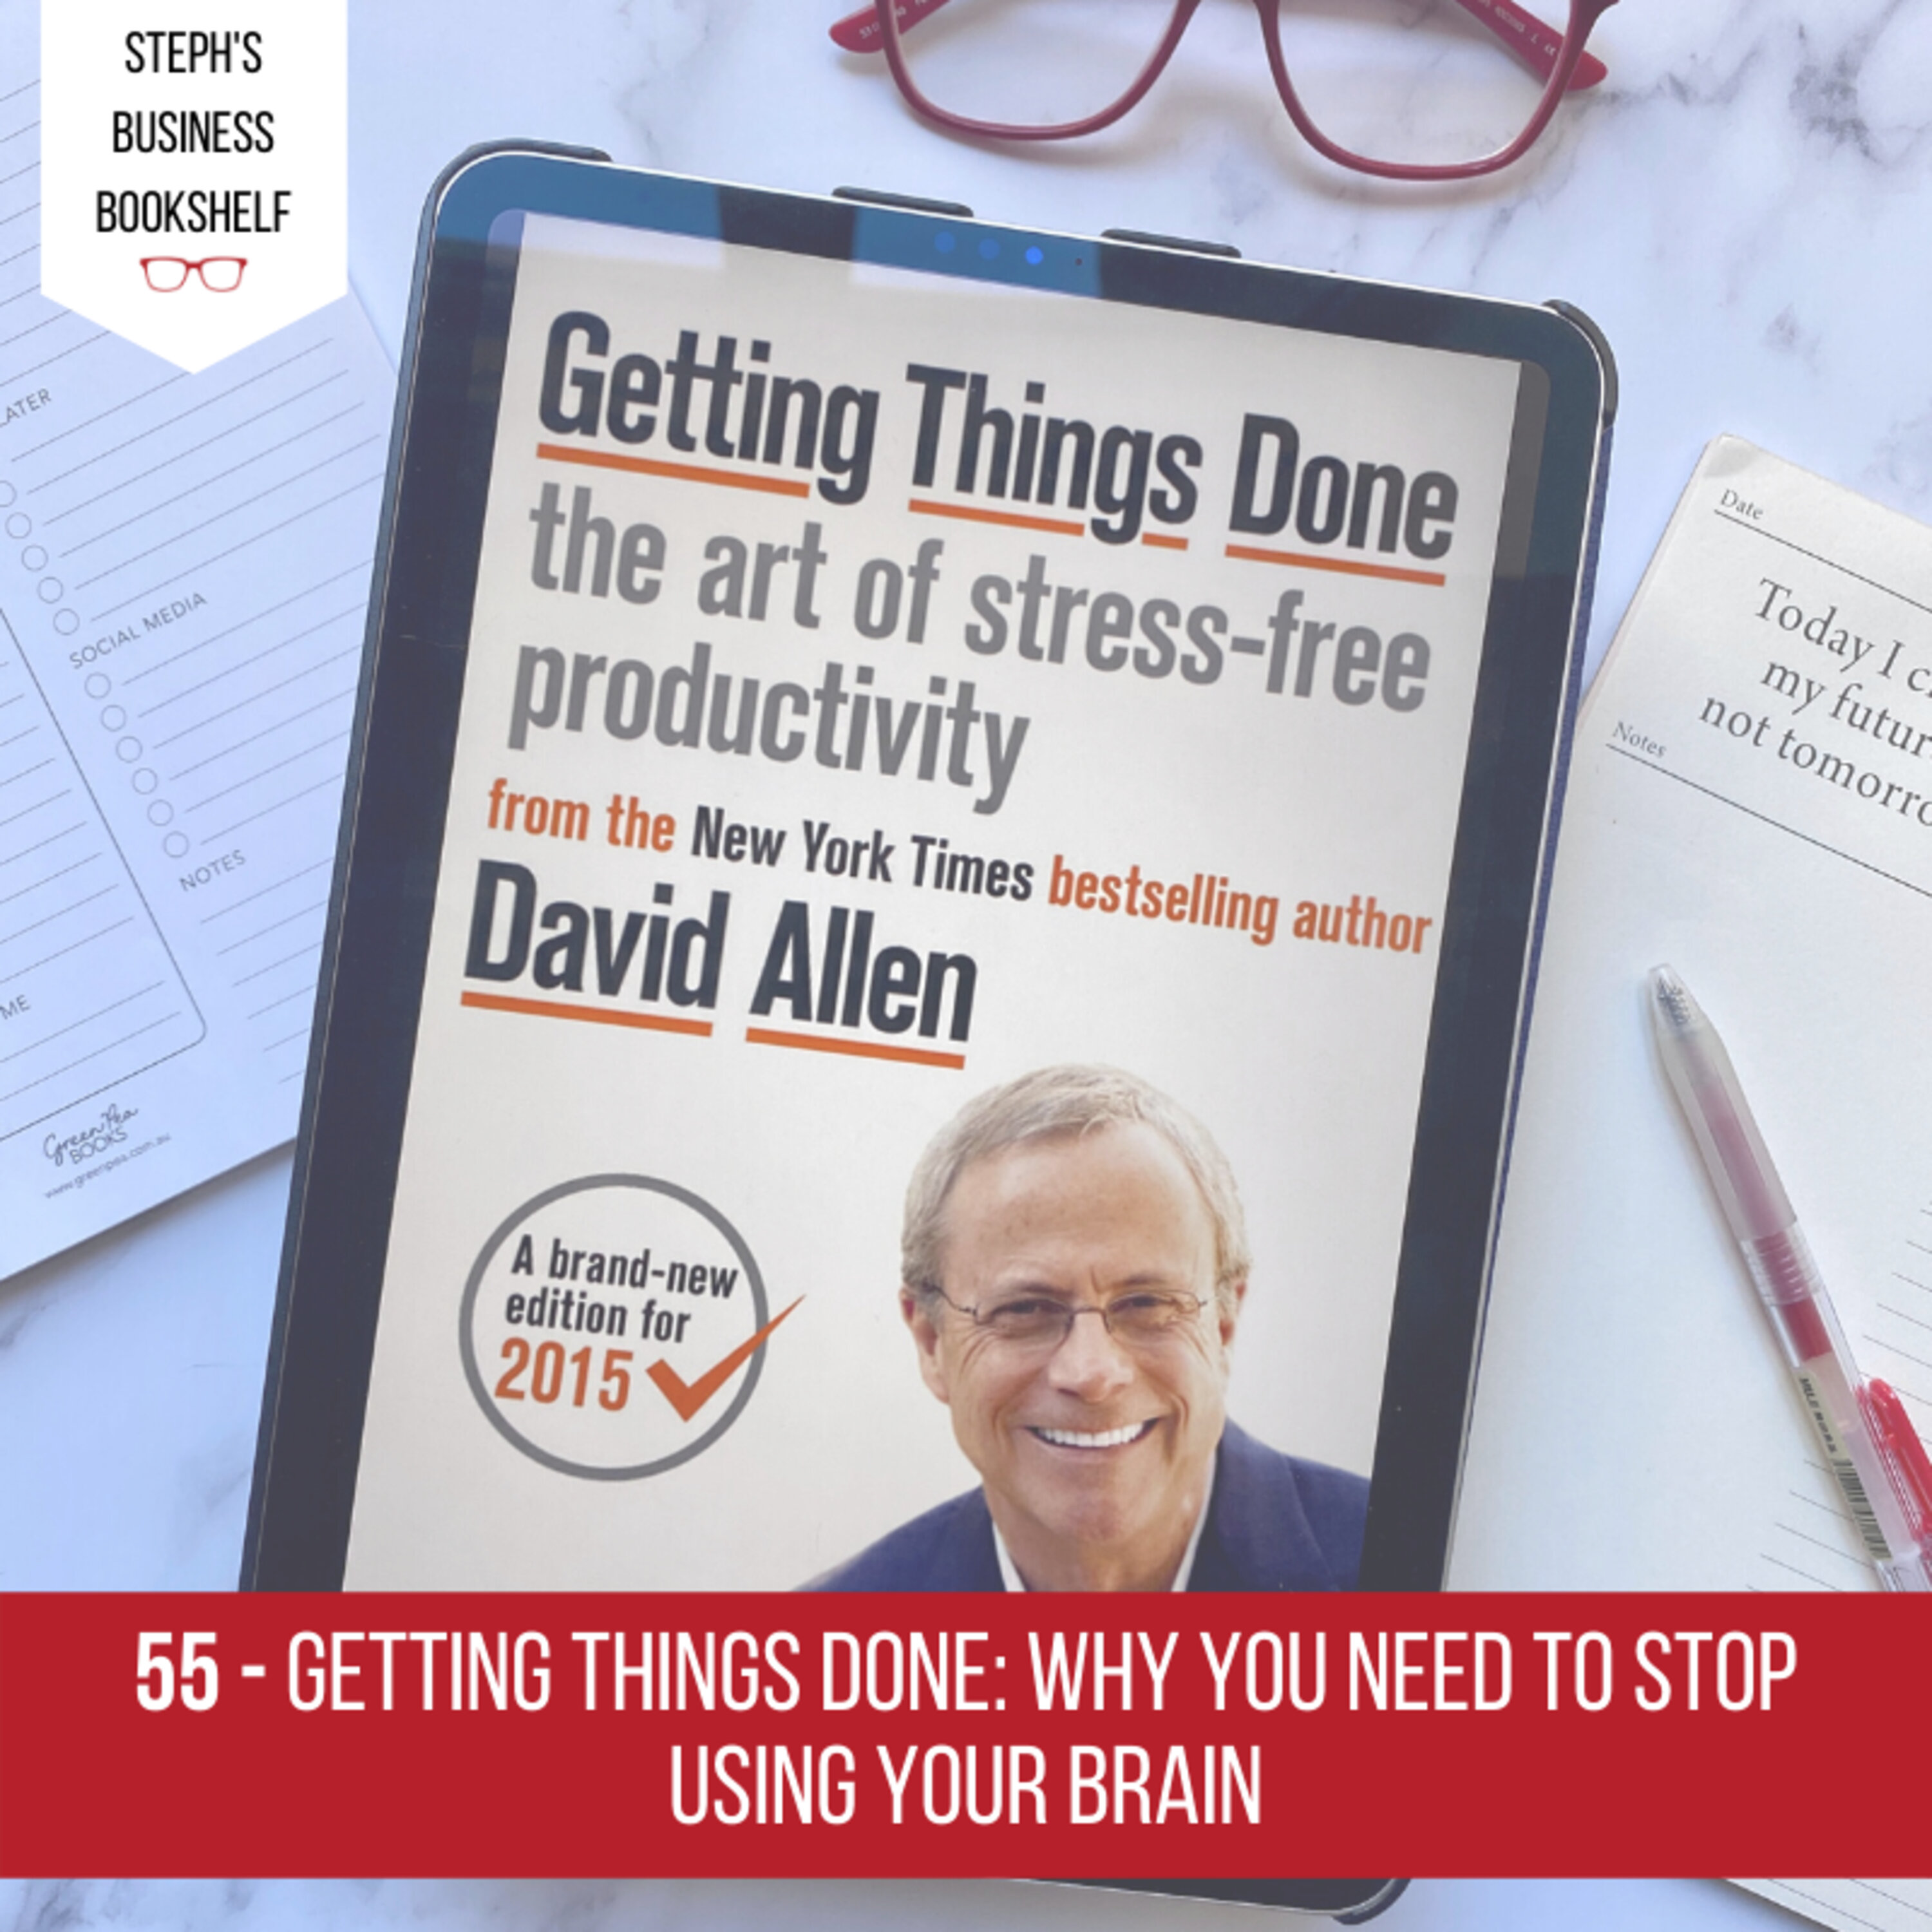 Getting Things Done by David Allen: why you need to stop using your brain